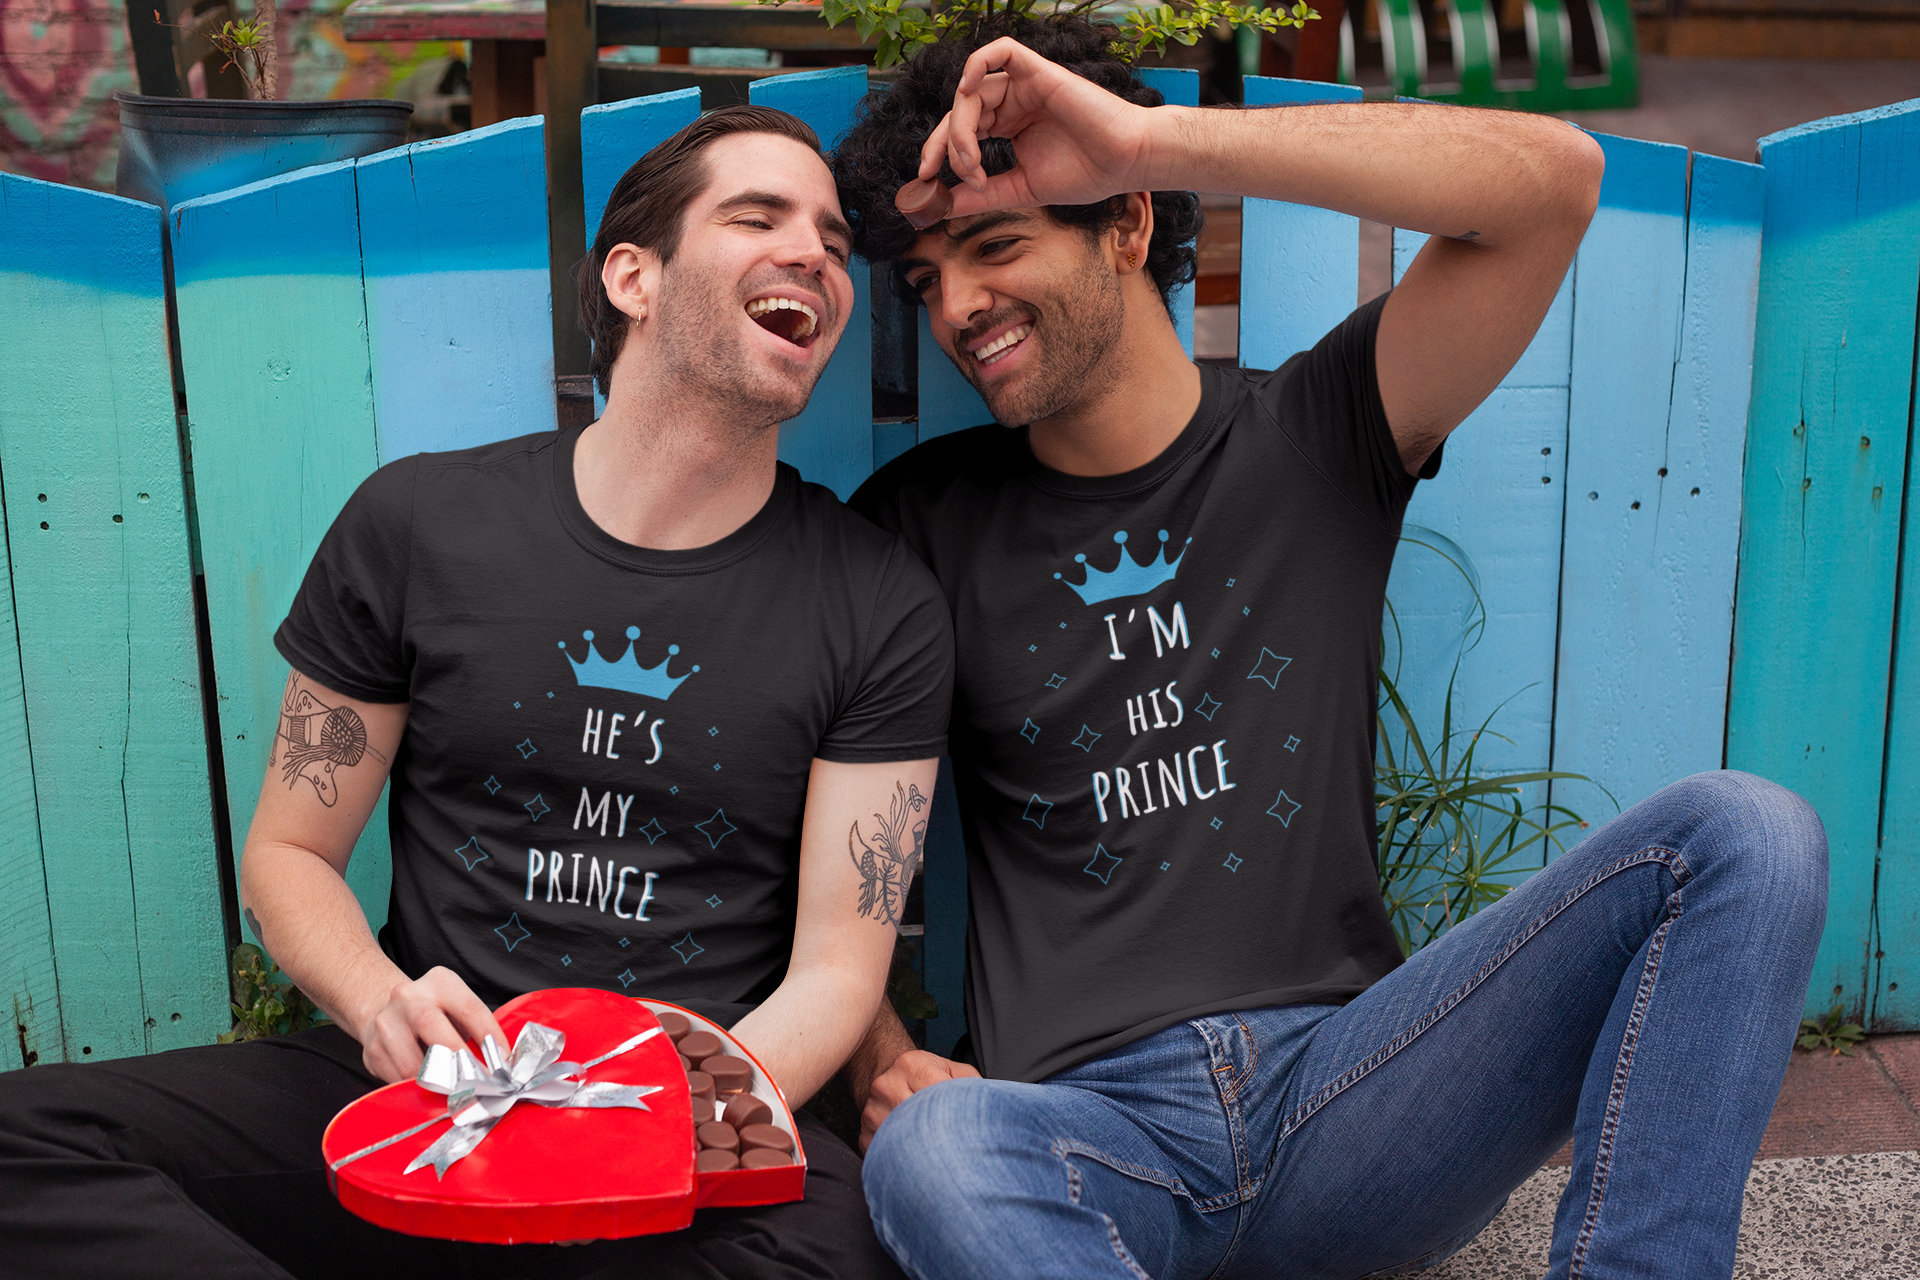 He is My Prince T-shirt Couples Disney Shirts Gay Shirts His and His T  Shirts Couple Shirts Pride Gay Shirts Made by VIVAMAKE 